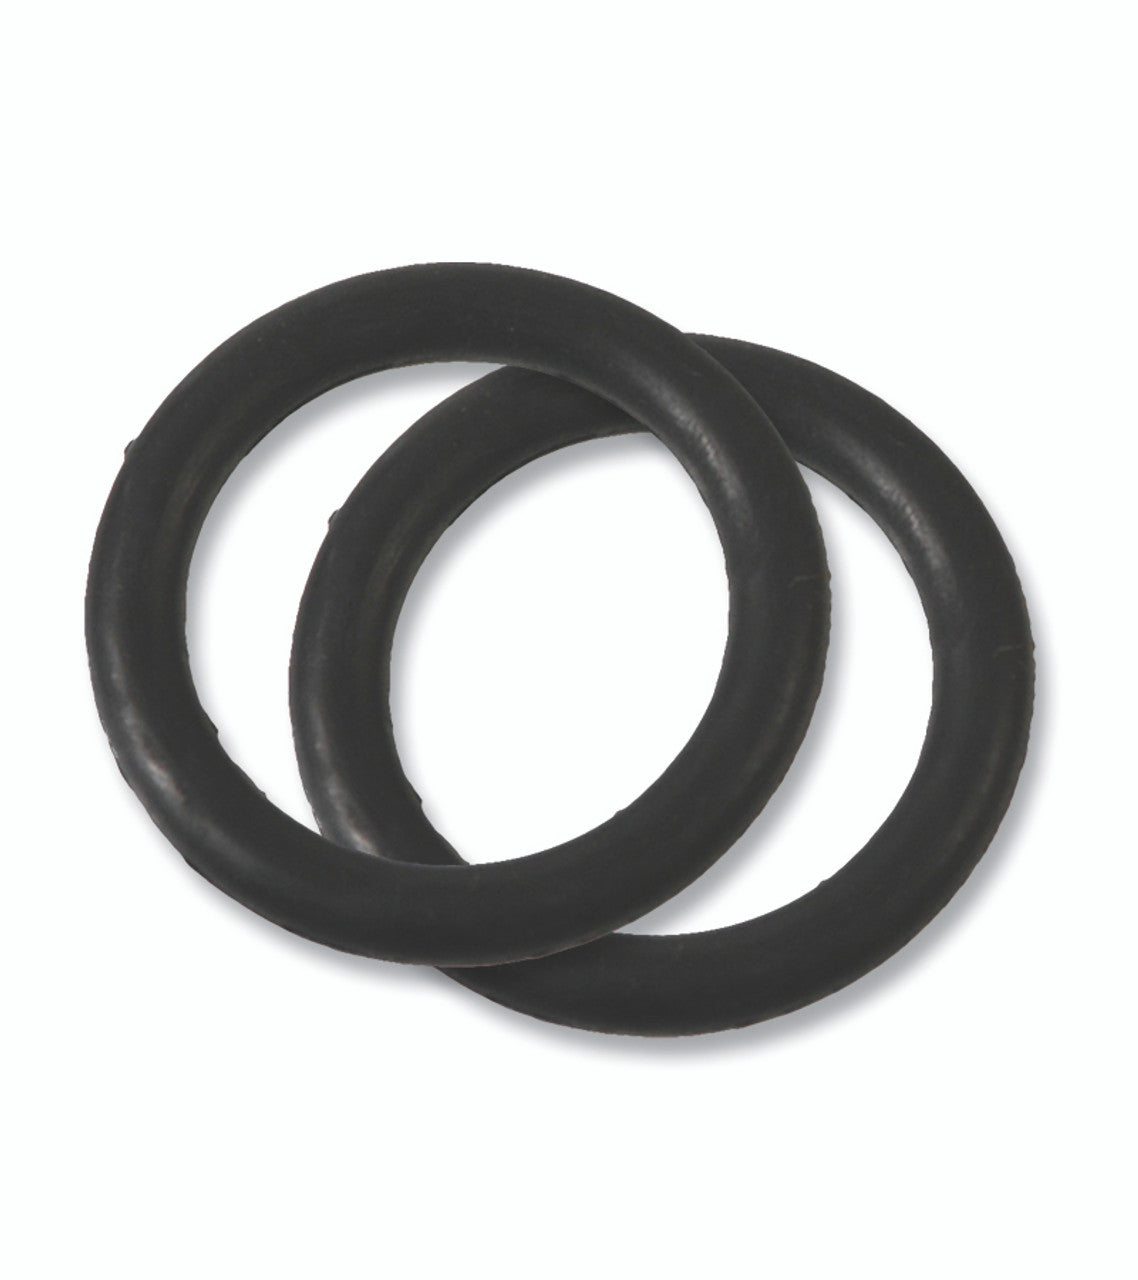 Black Rubber Replacement Bands for Peacock Safety Stirrups-TexanSaddles.com